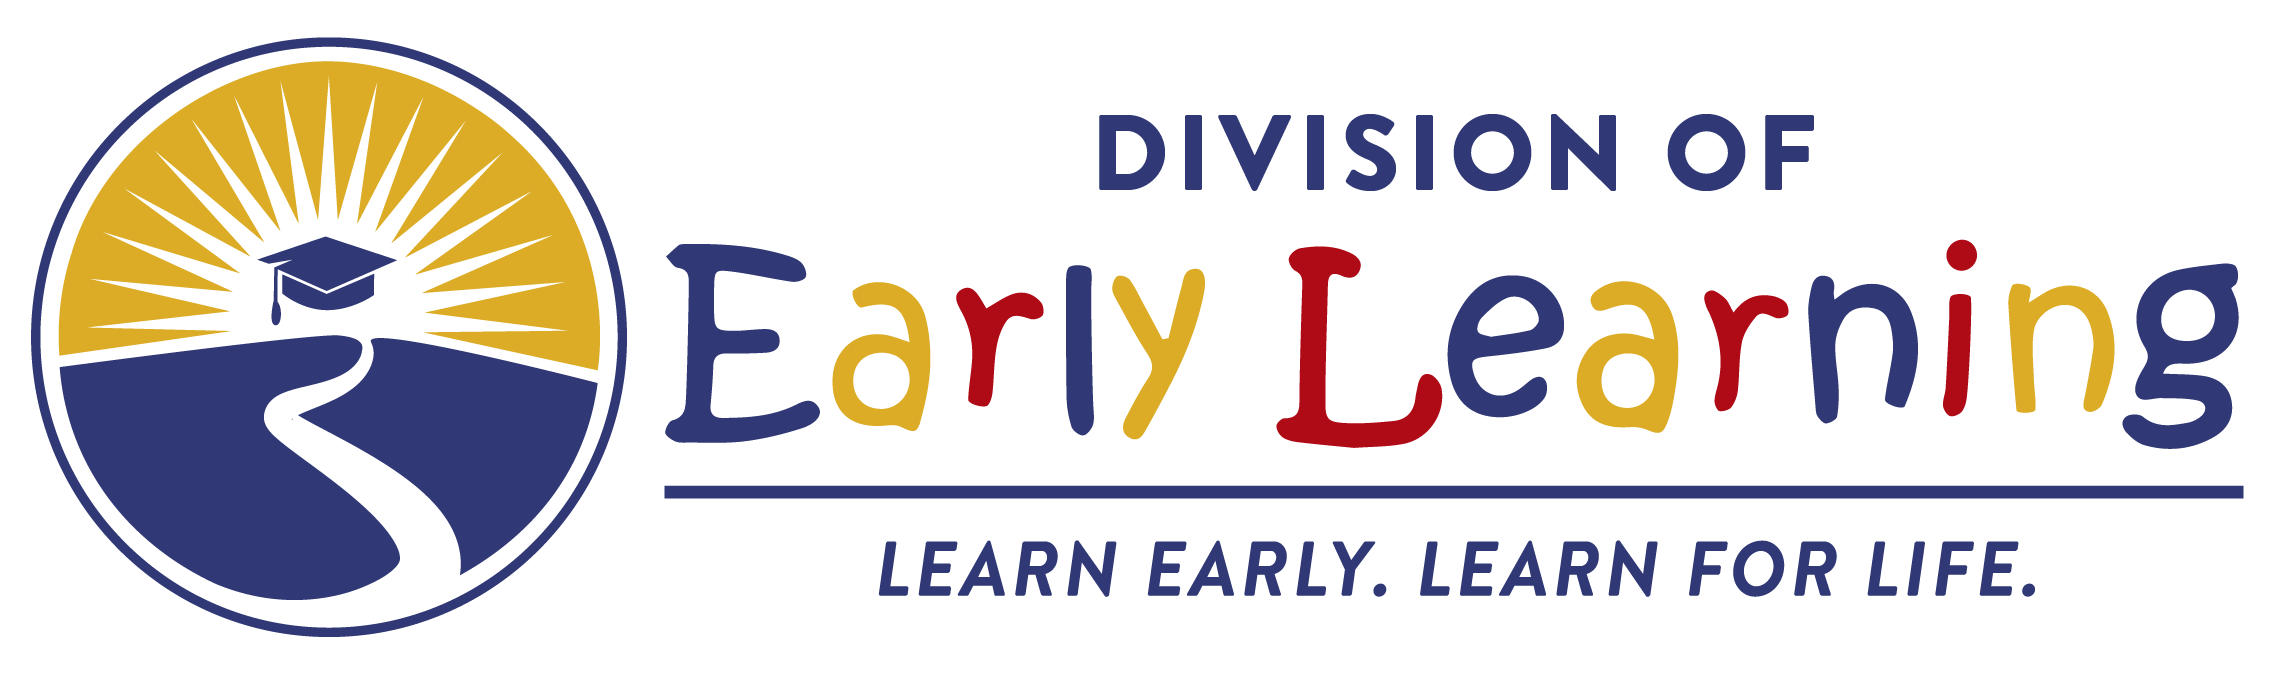 Office of Early Learning Coalition